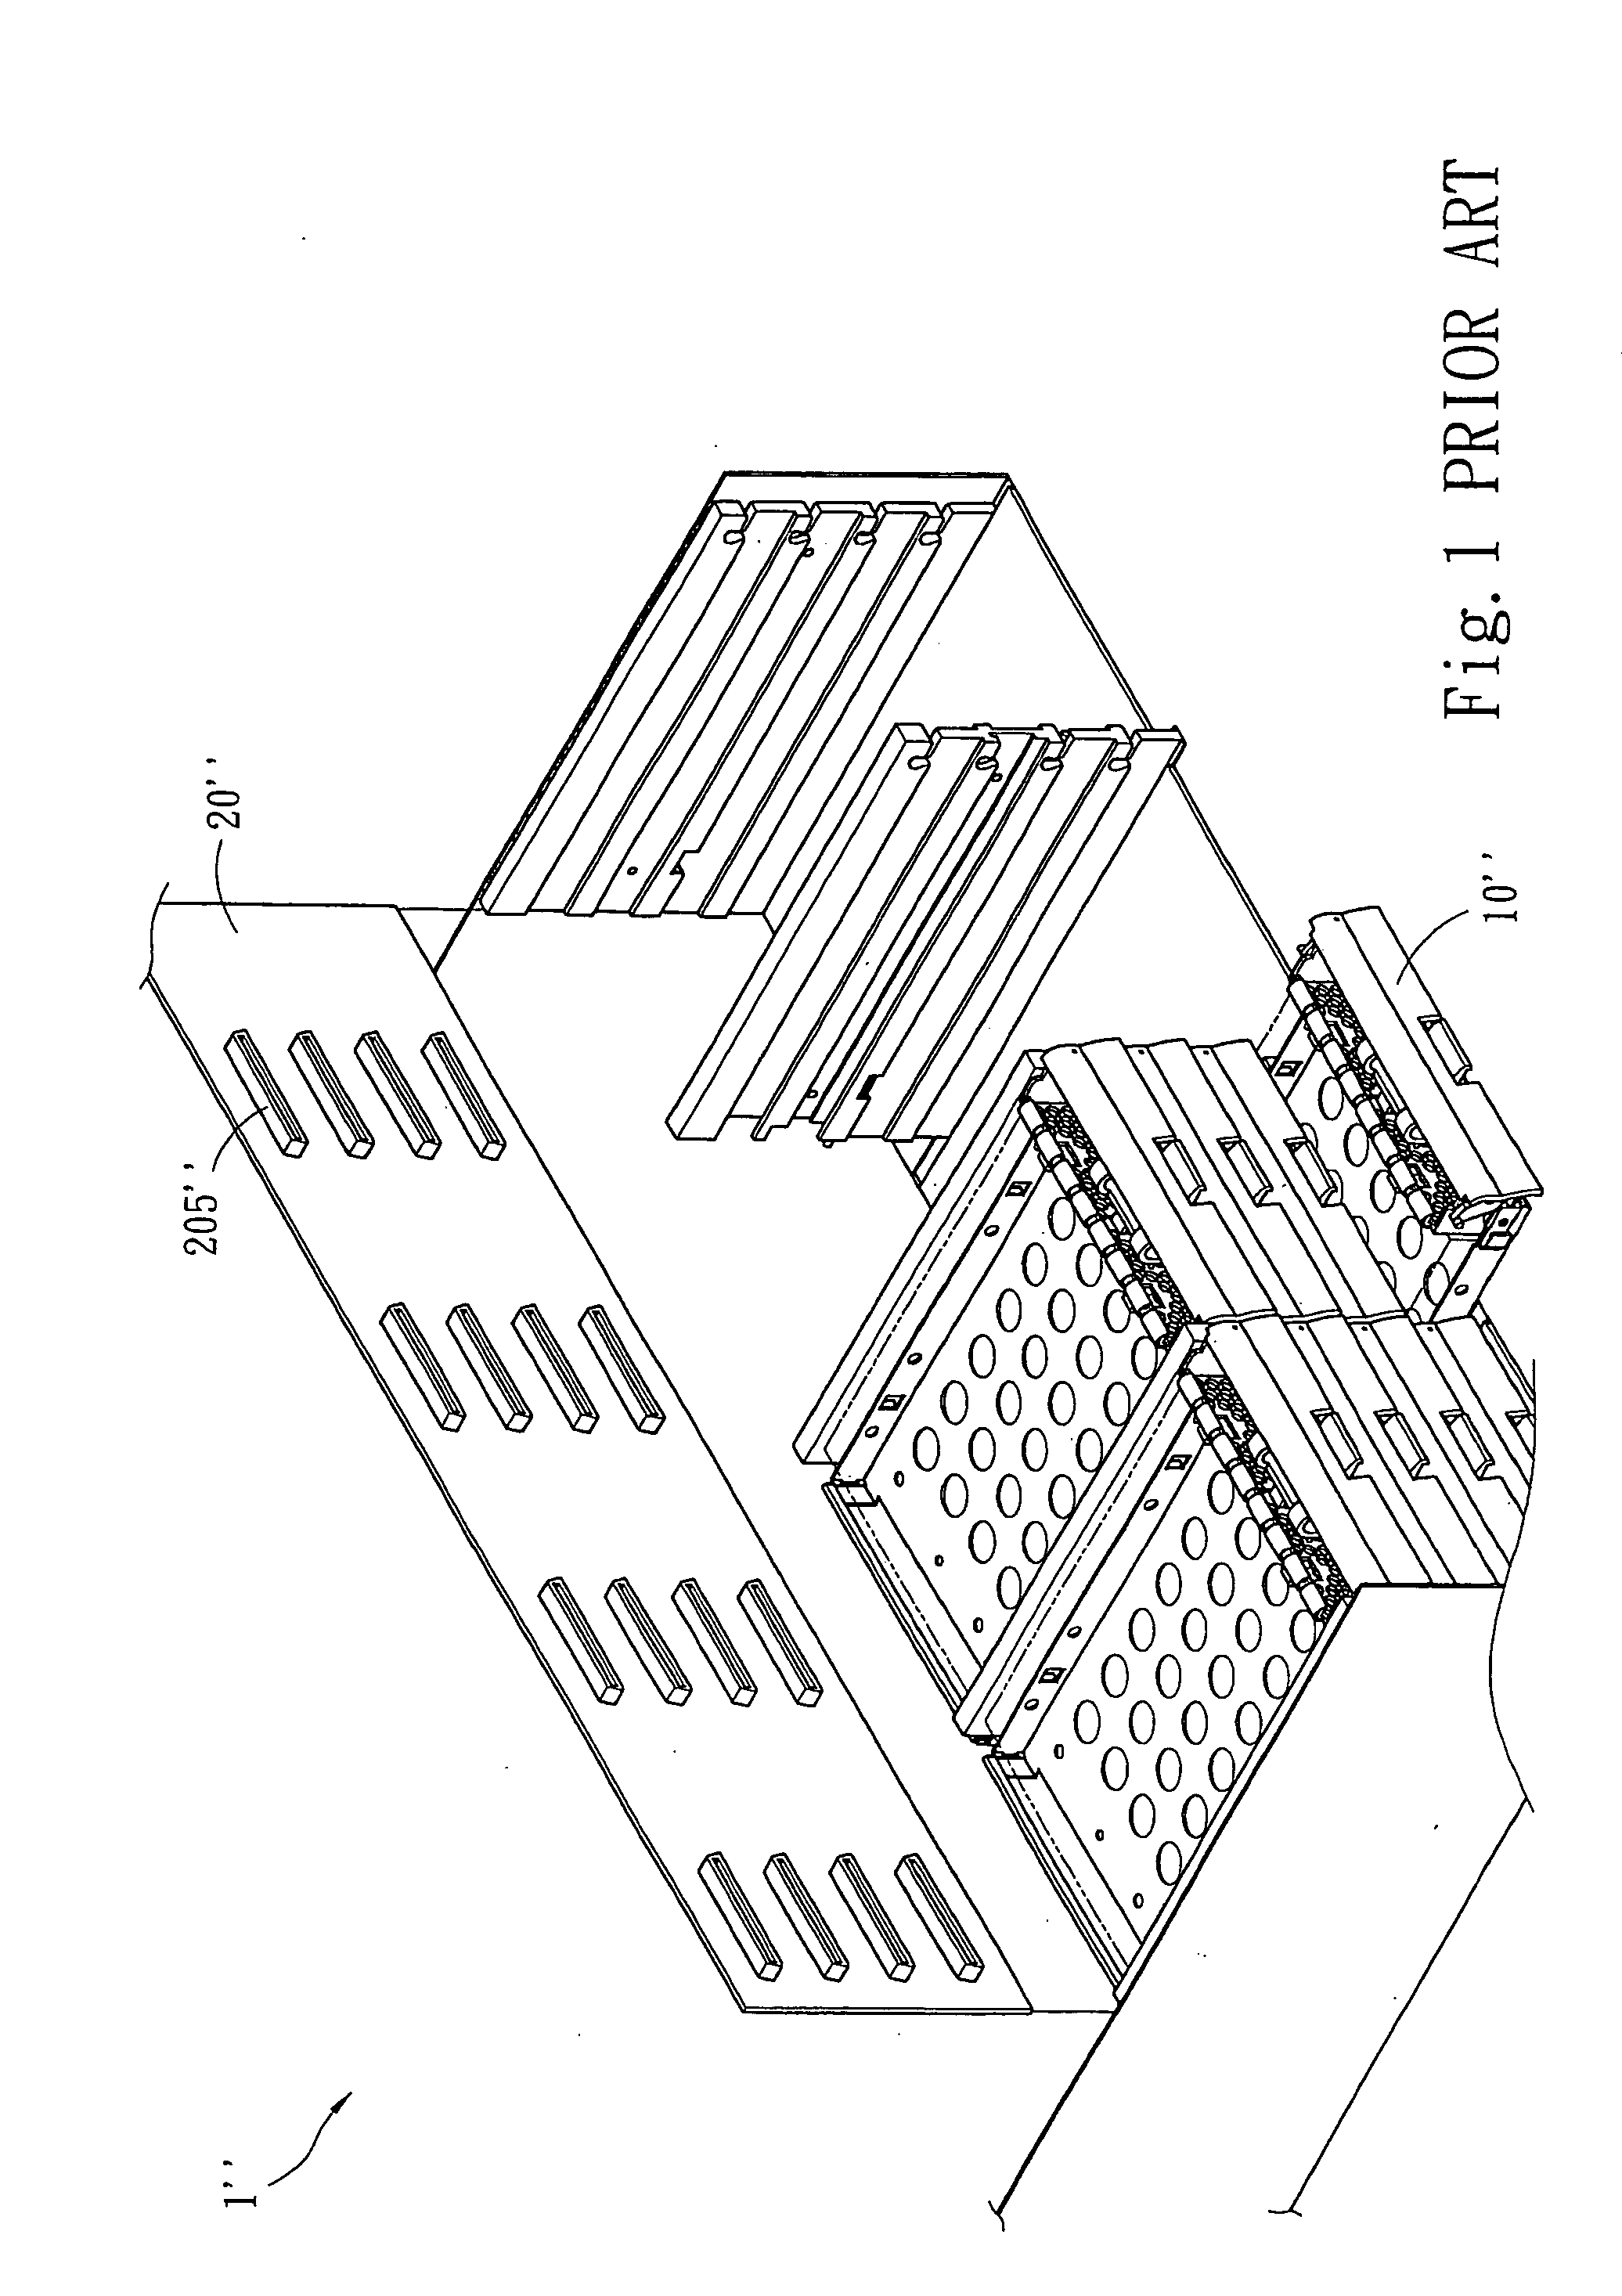 Circuit board group for electrically coupling electronic devices